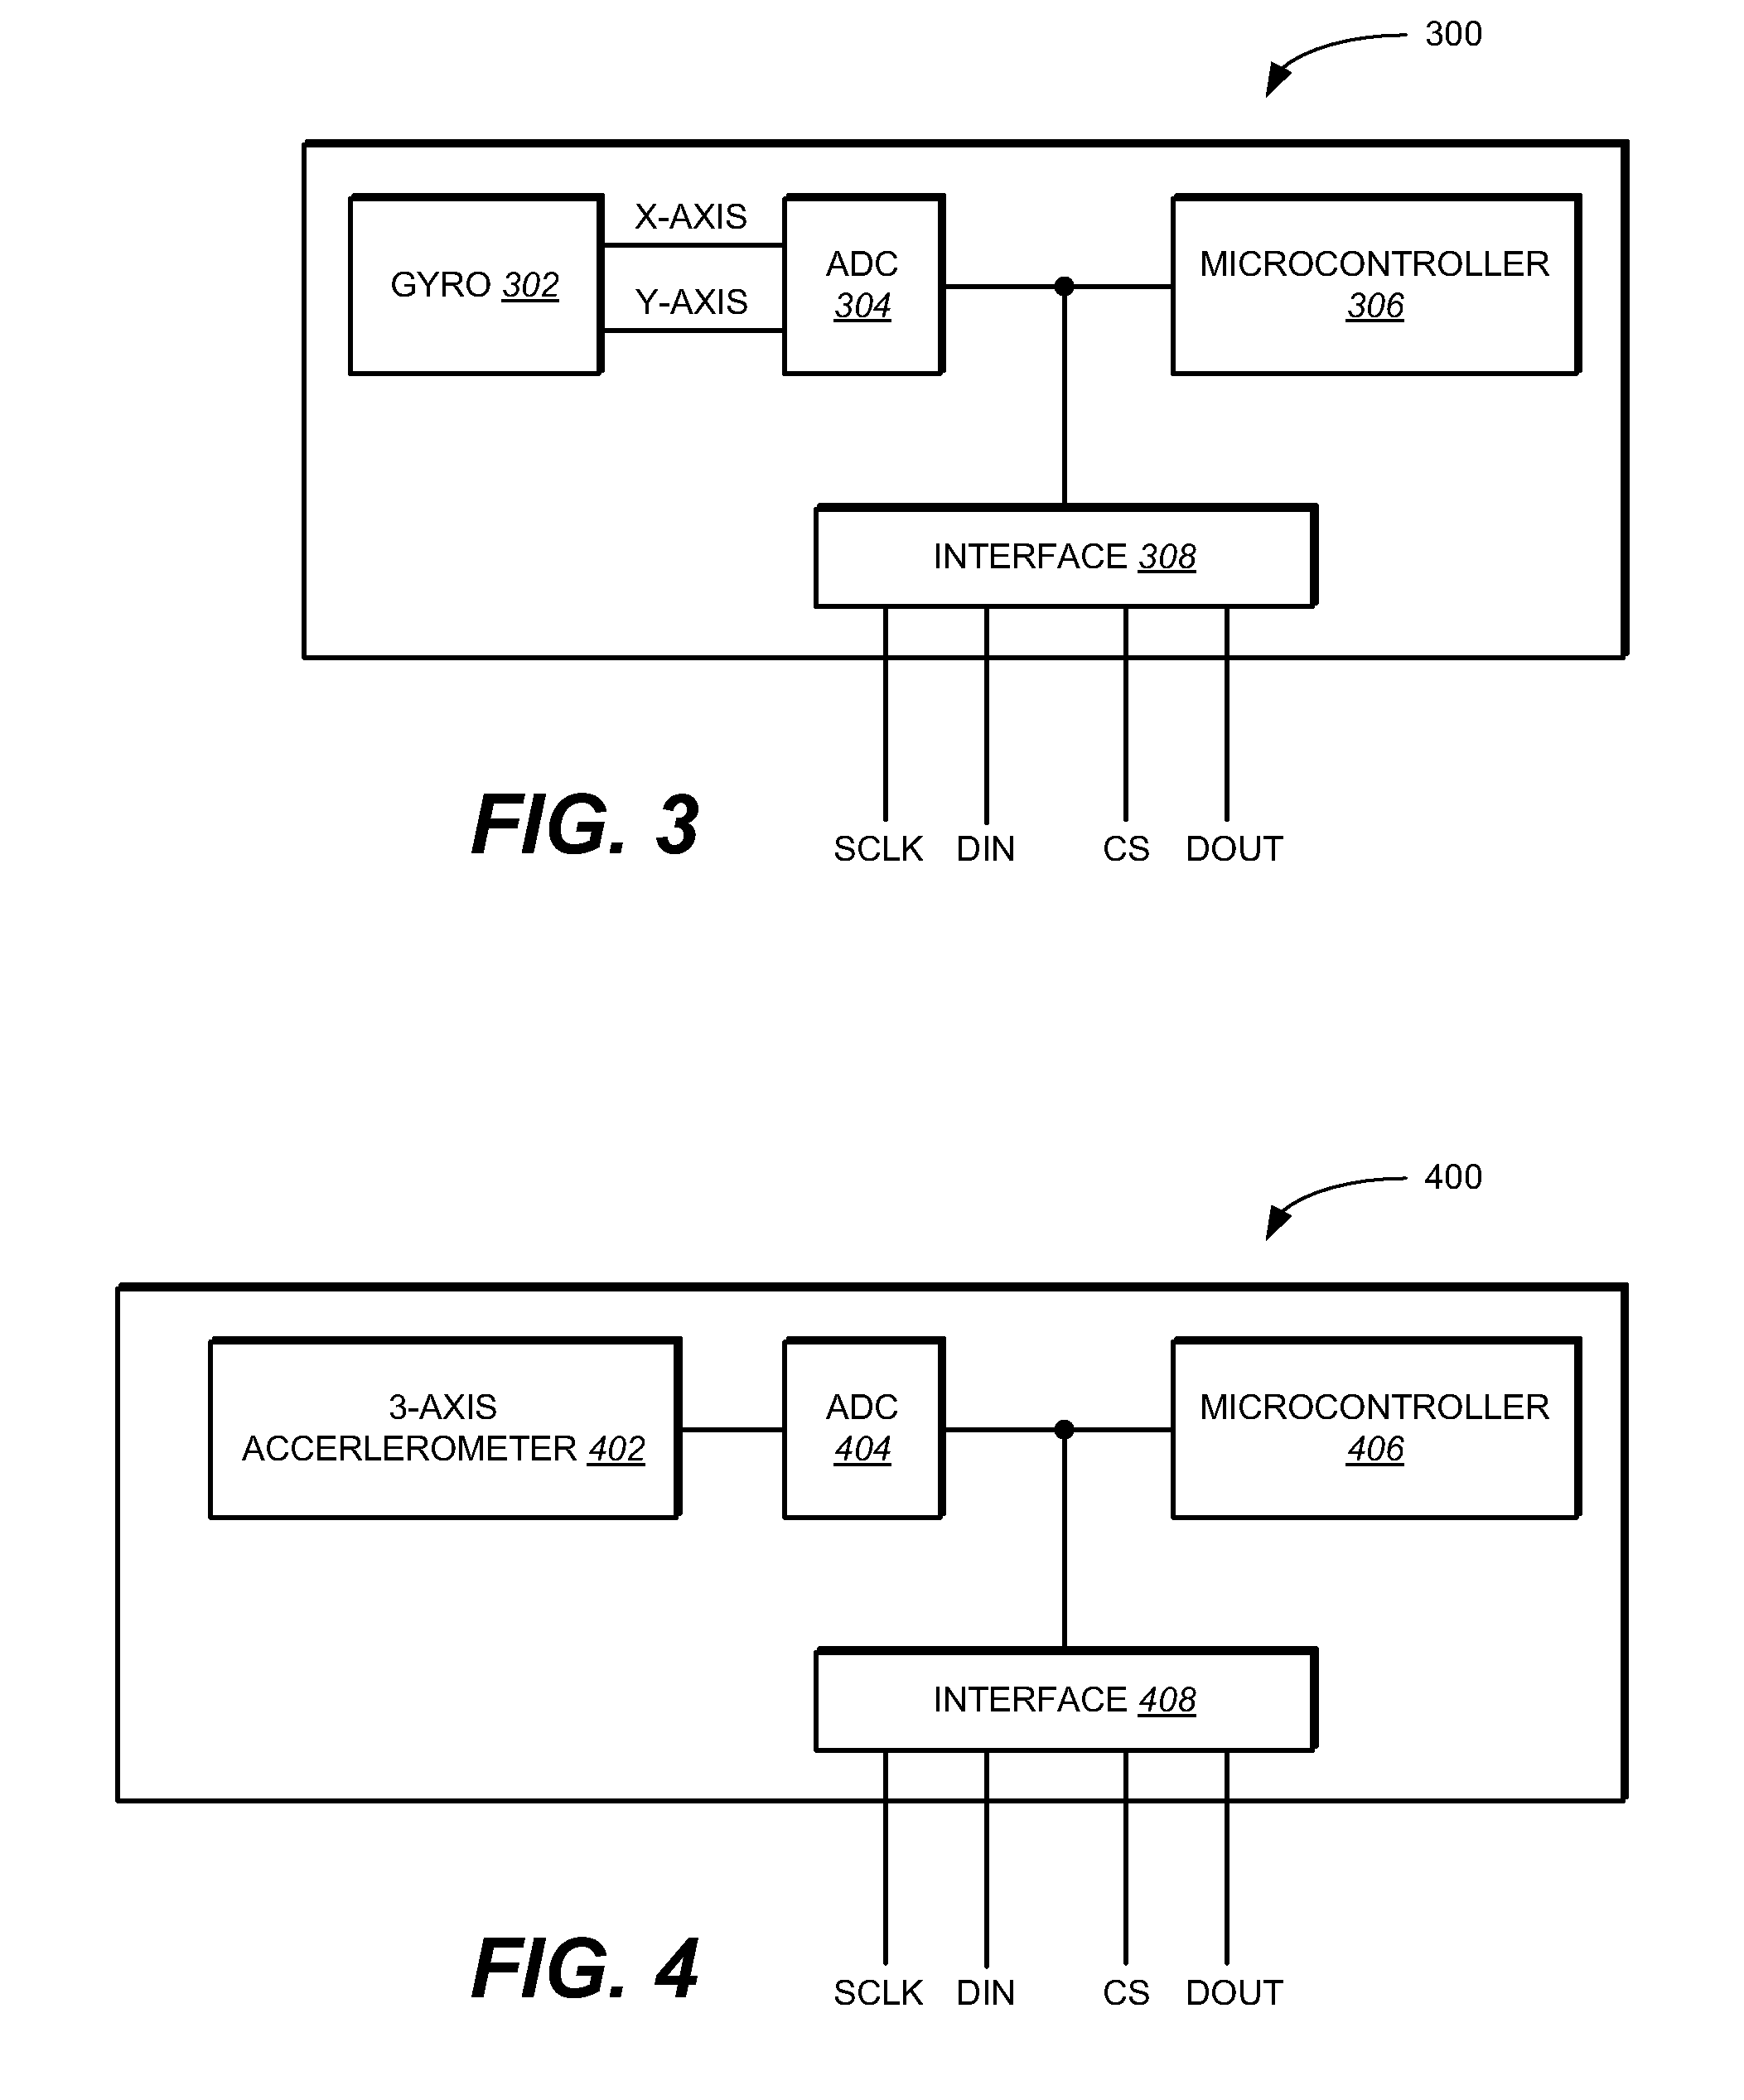 Integrated motion processing unit (MPU) with MEMS inertial sensing and embedded digital electronics